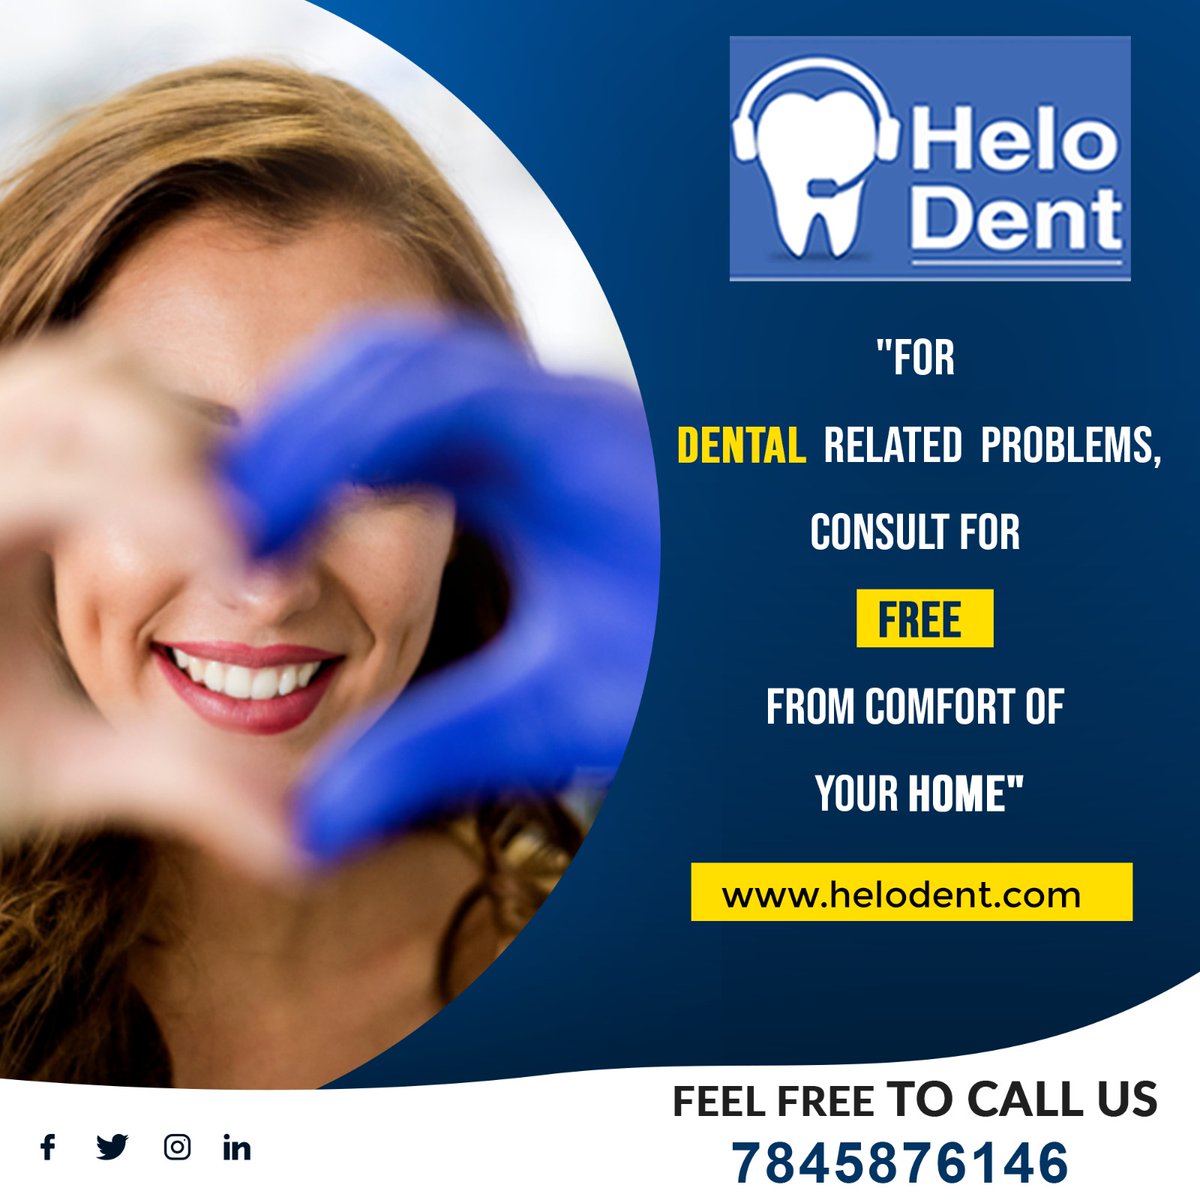 Helodent
'Dental Care & Protection'
For dental problems, get treated by our expert dentists in your area'. Book FREE online consultation
📷Call us for more details: 7845876146
#helodent #dentalconsultation #dental #dentalhealth #dentalhealthcare #dentalneeds #dentalcare